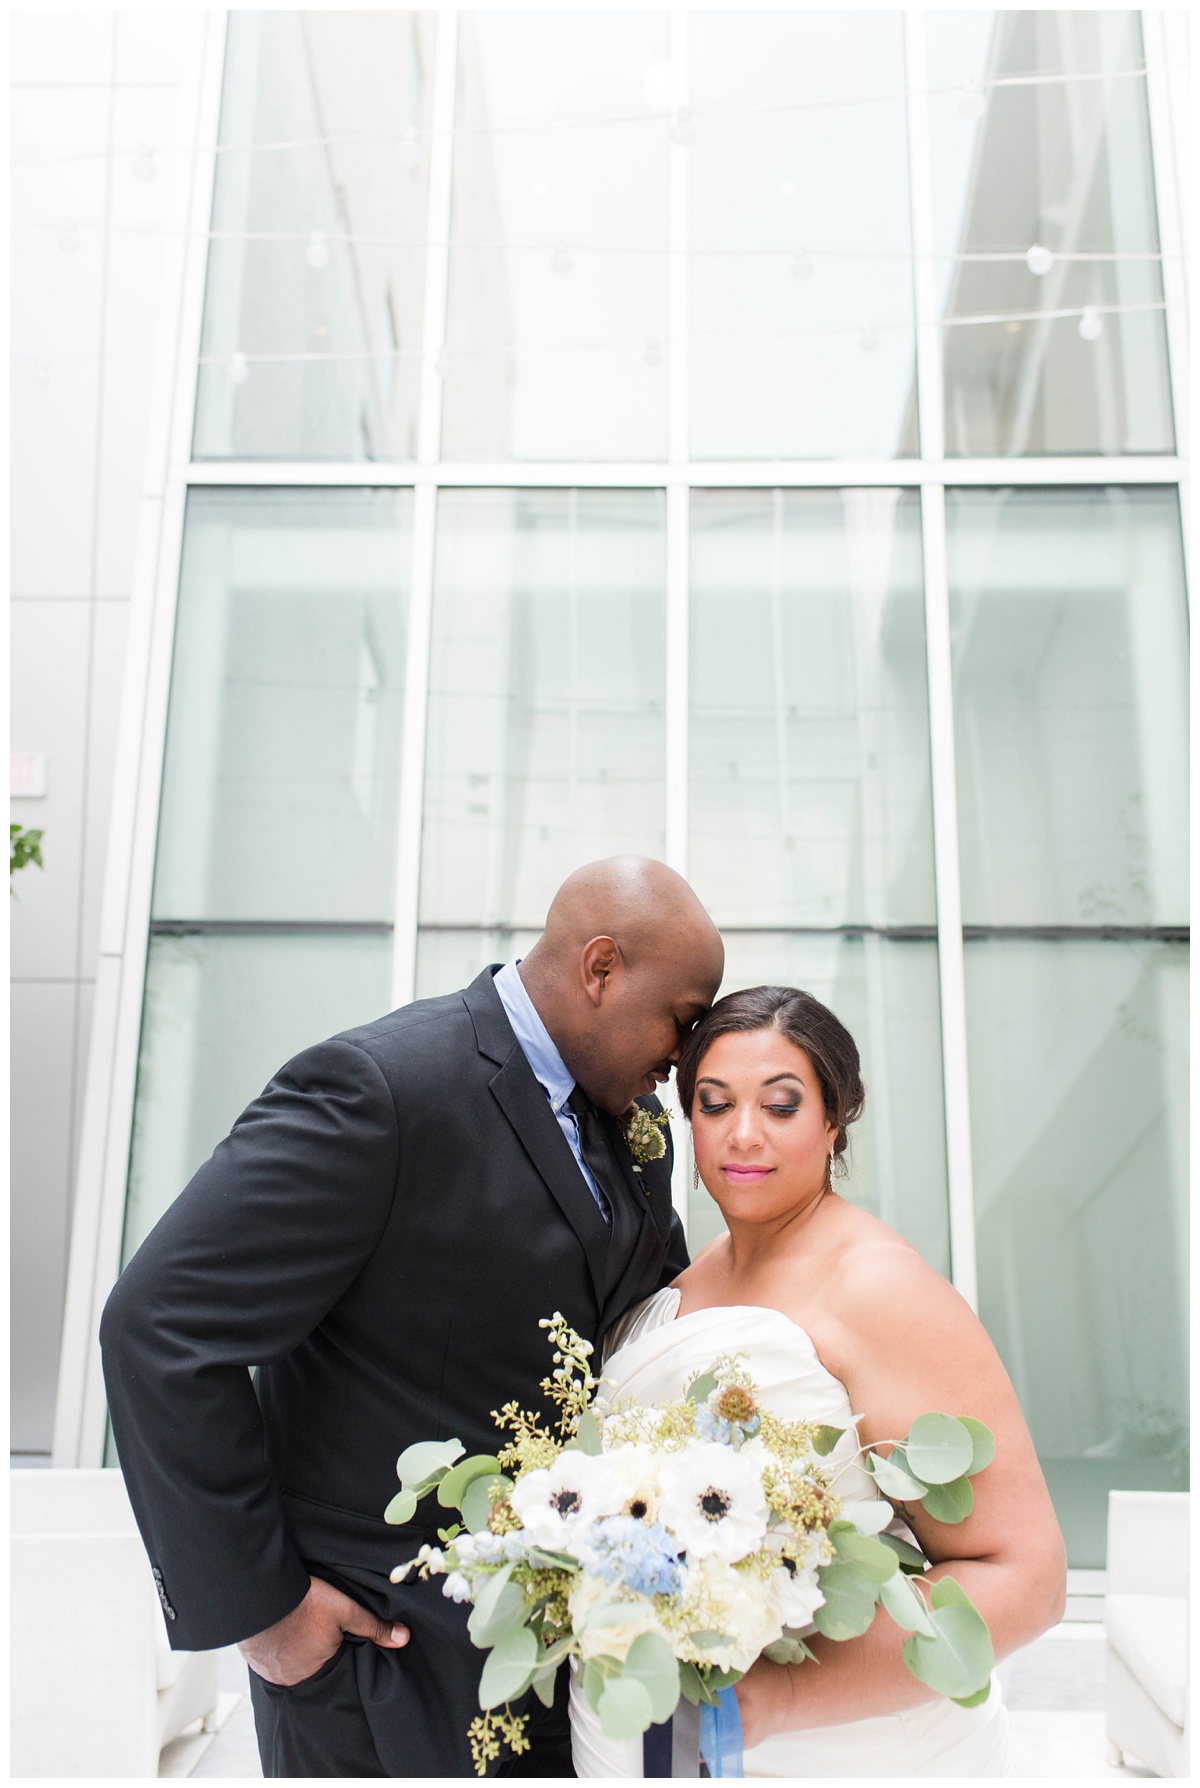 shades of blue wedding inspiration at quirk hotel in richmond virginia by rva wedding photographer sarah & dave photography bride getting ready photo inspiration bride and groom portrait inspiration